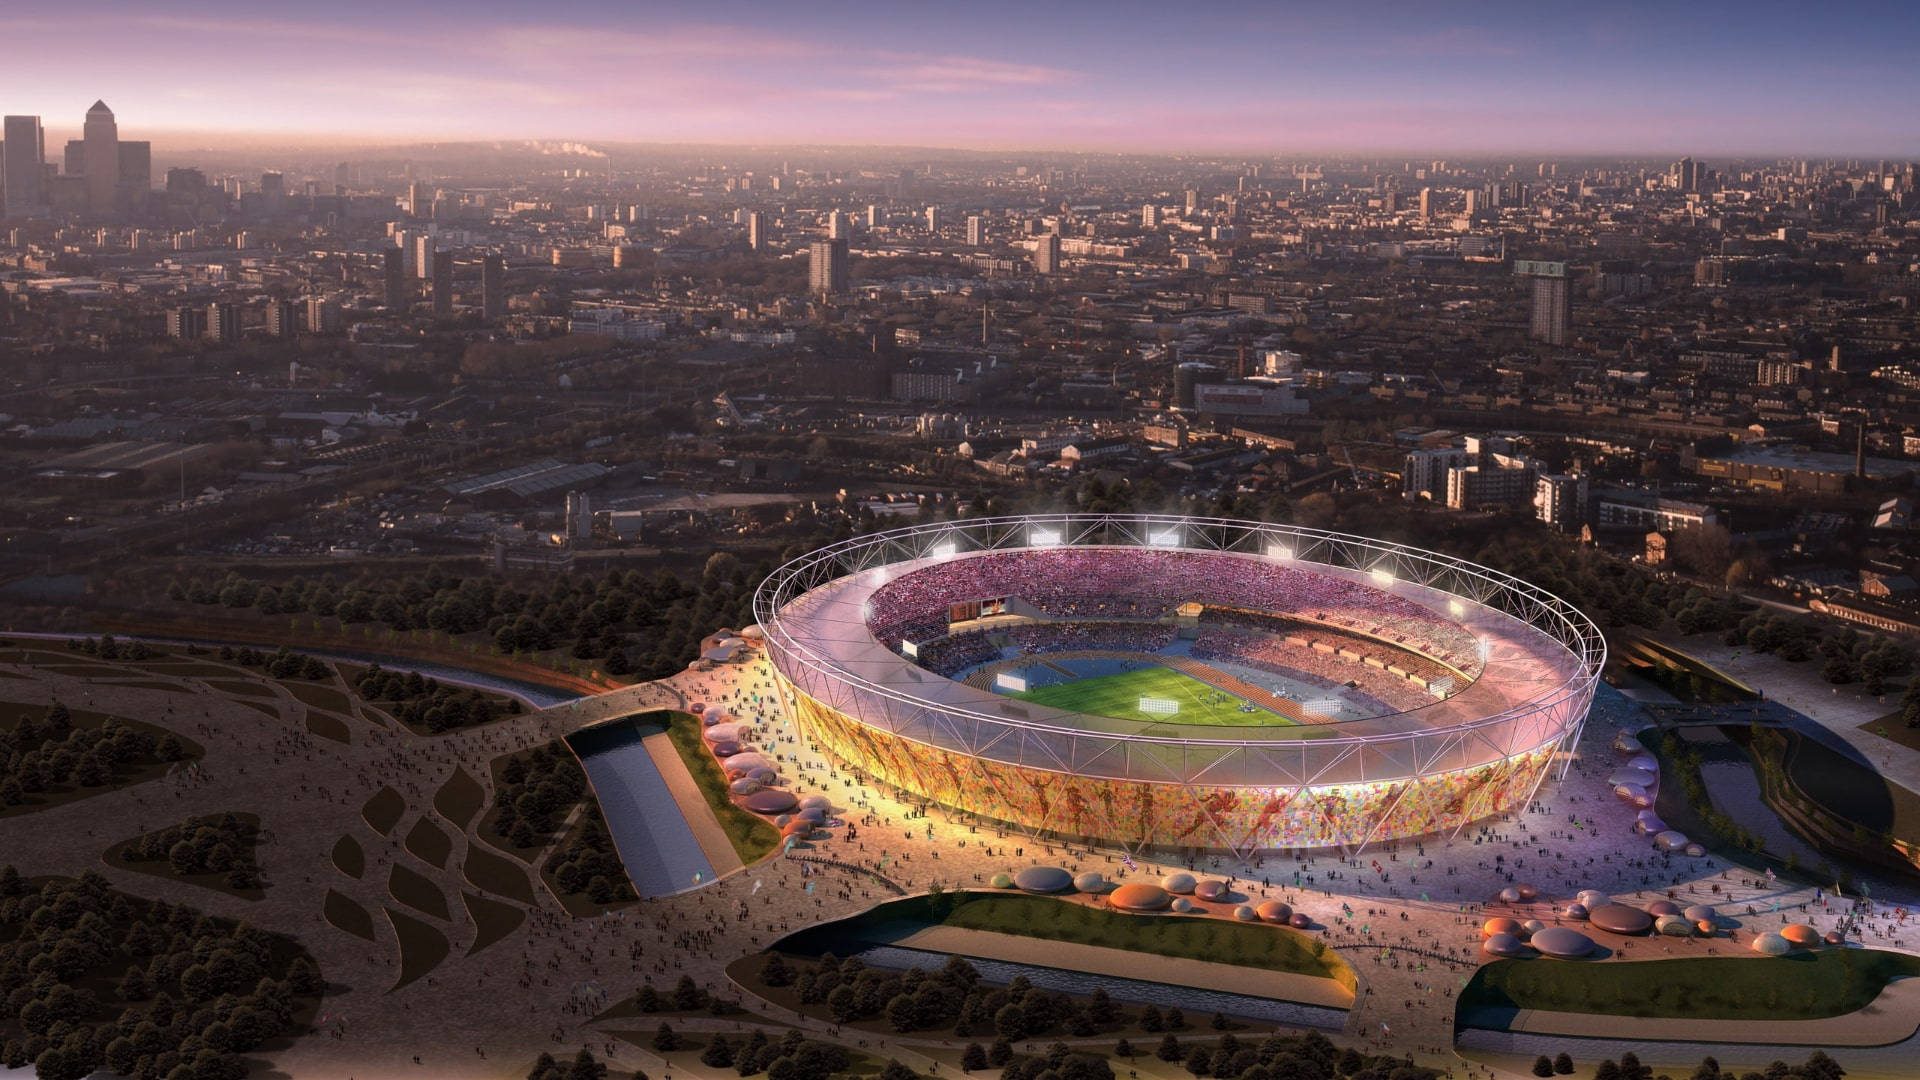 A Spectacular Sunset Visible Through The Stadium Of The Olympics Background